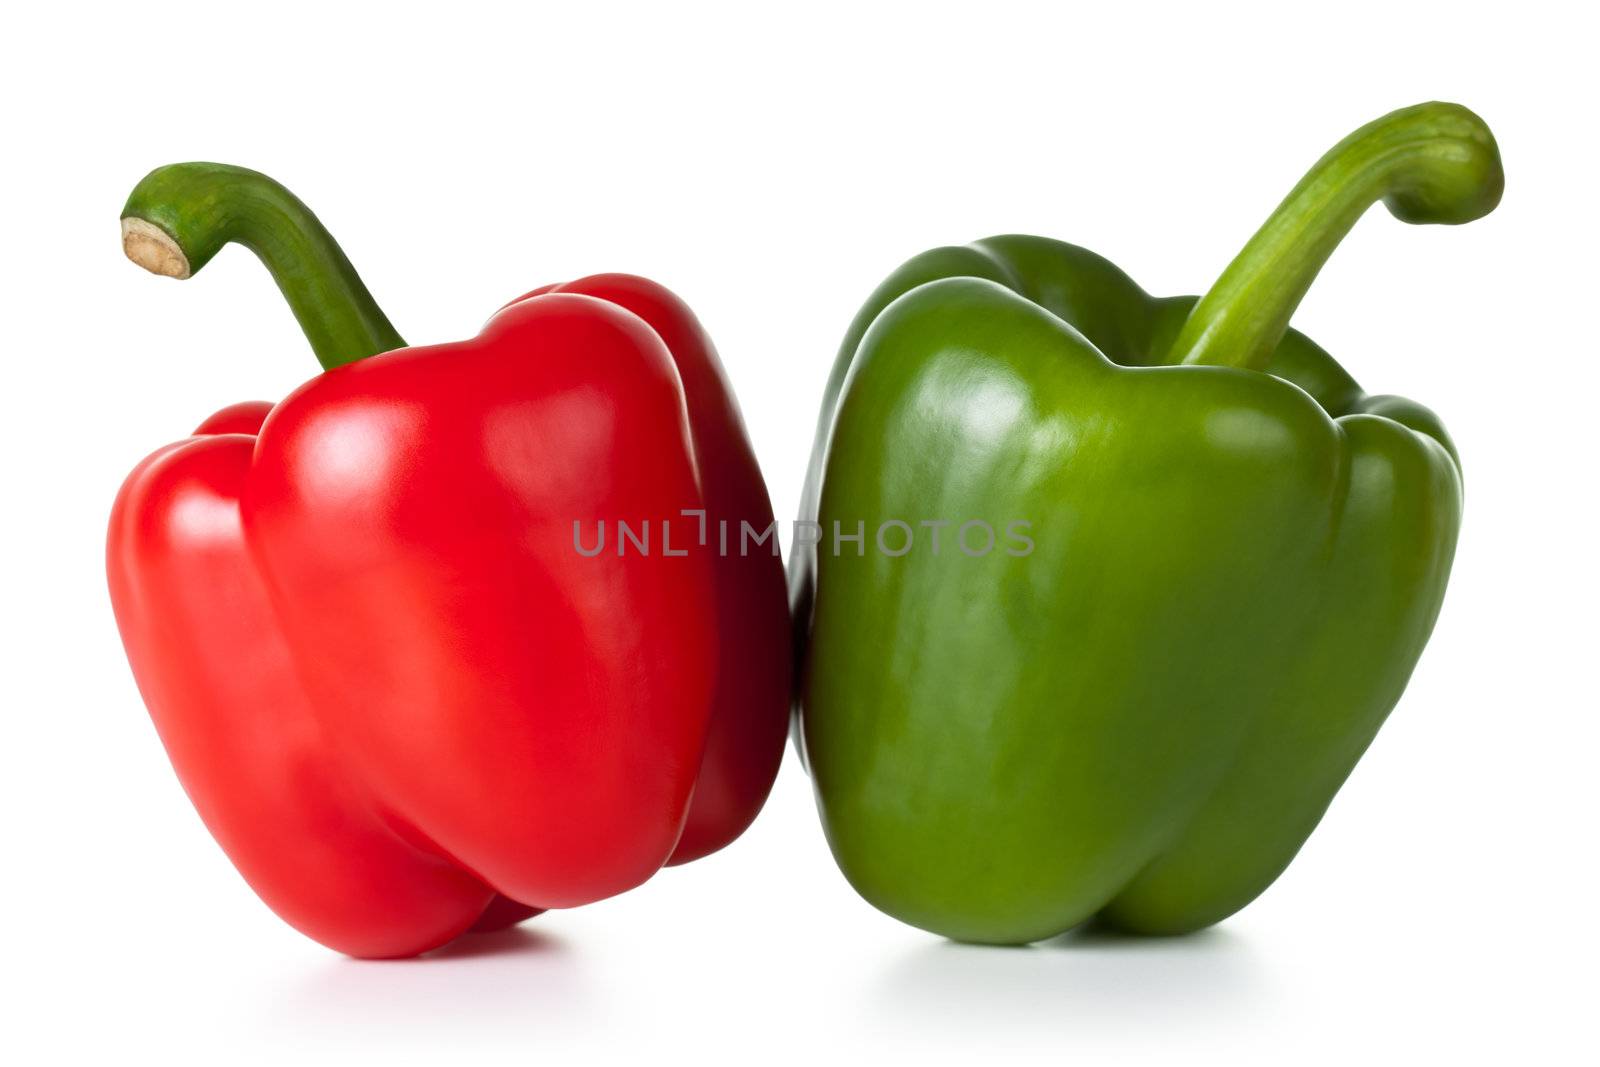 Paprika (pepper) vegetables on white background. Red and green one